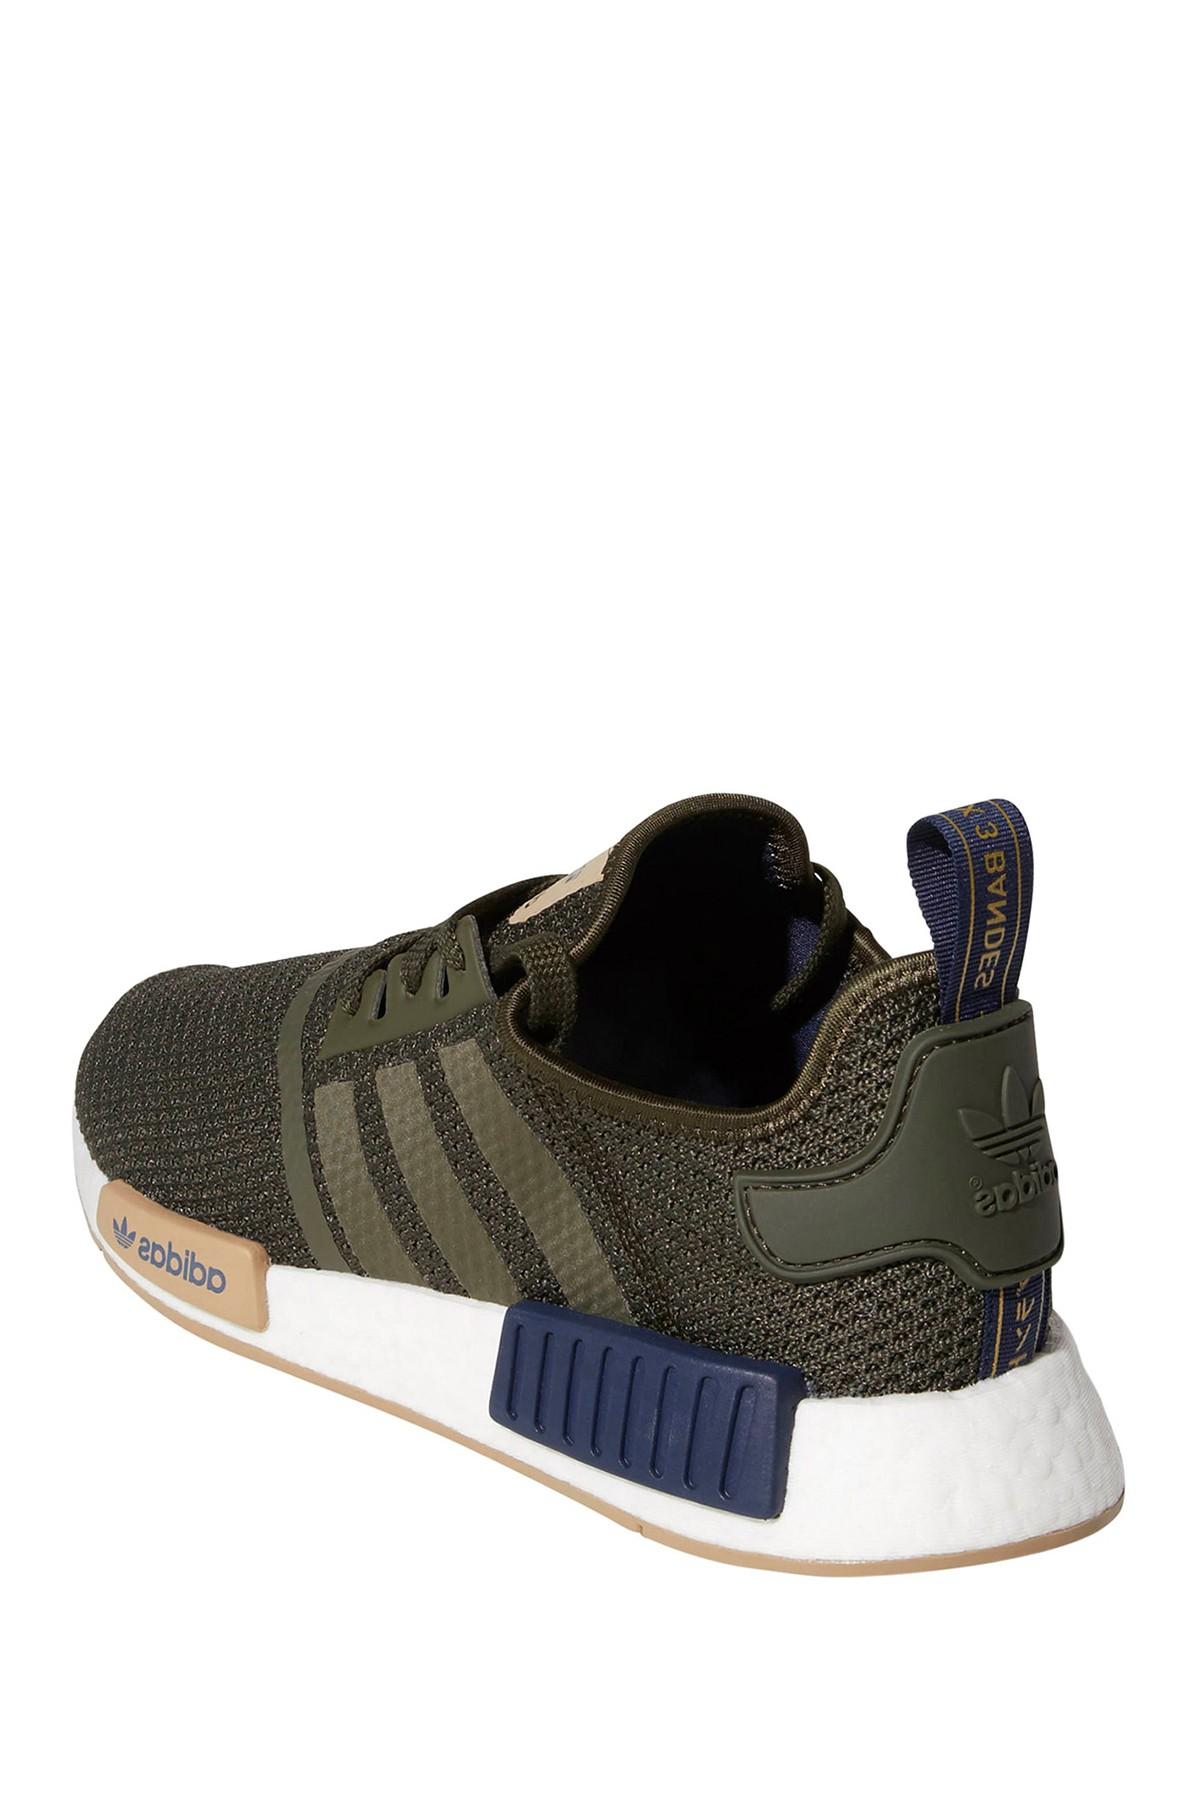 nmd r1 country sneaker